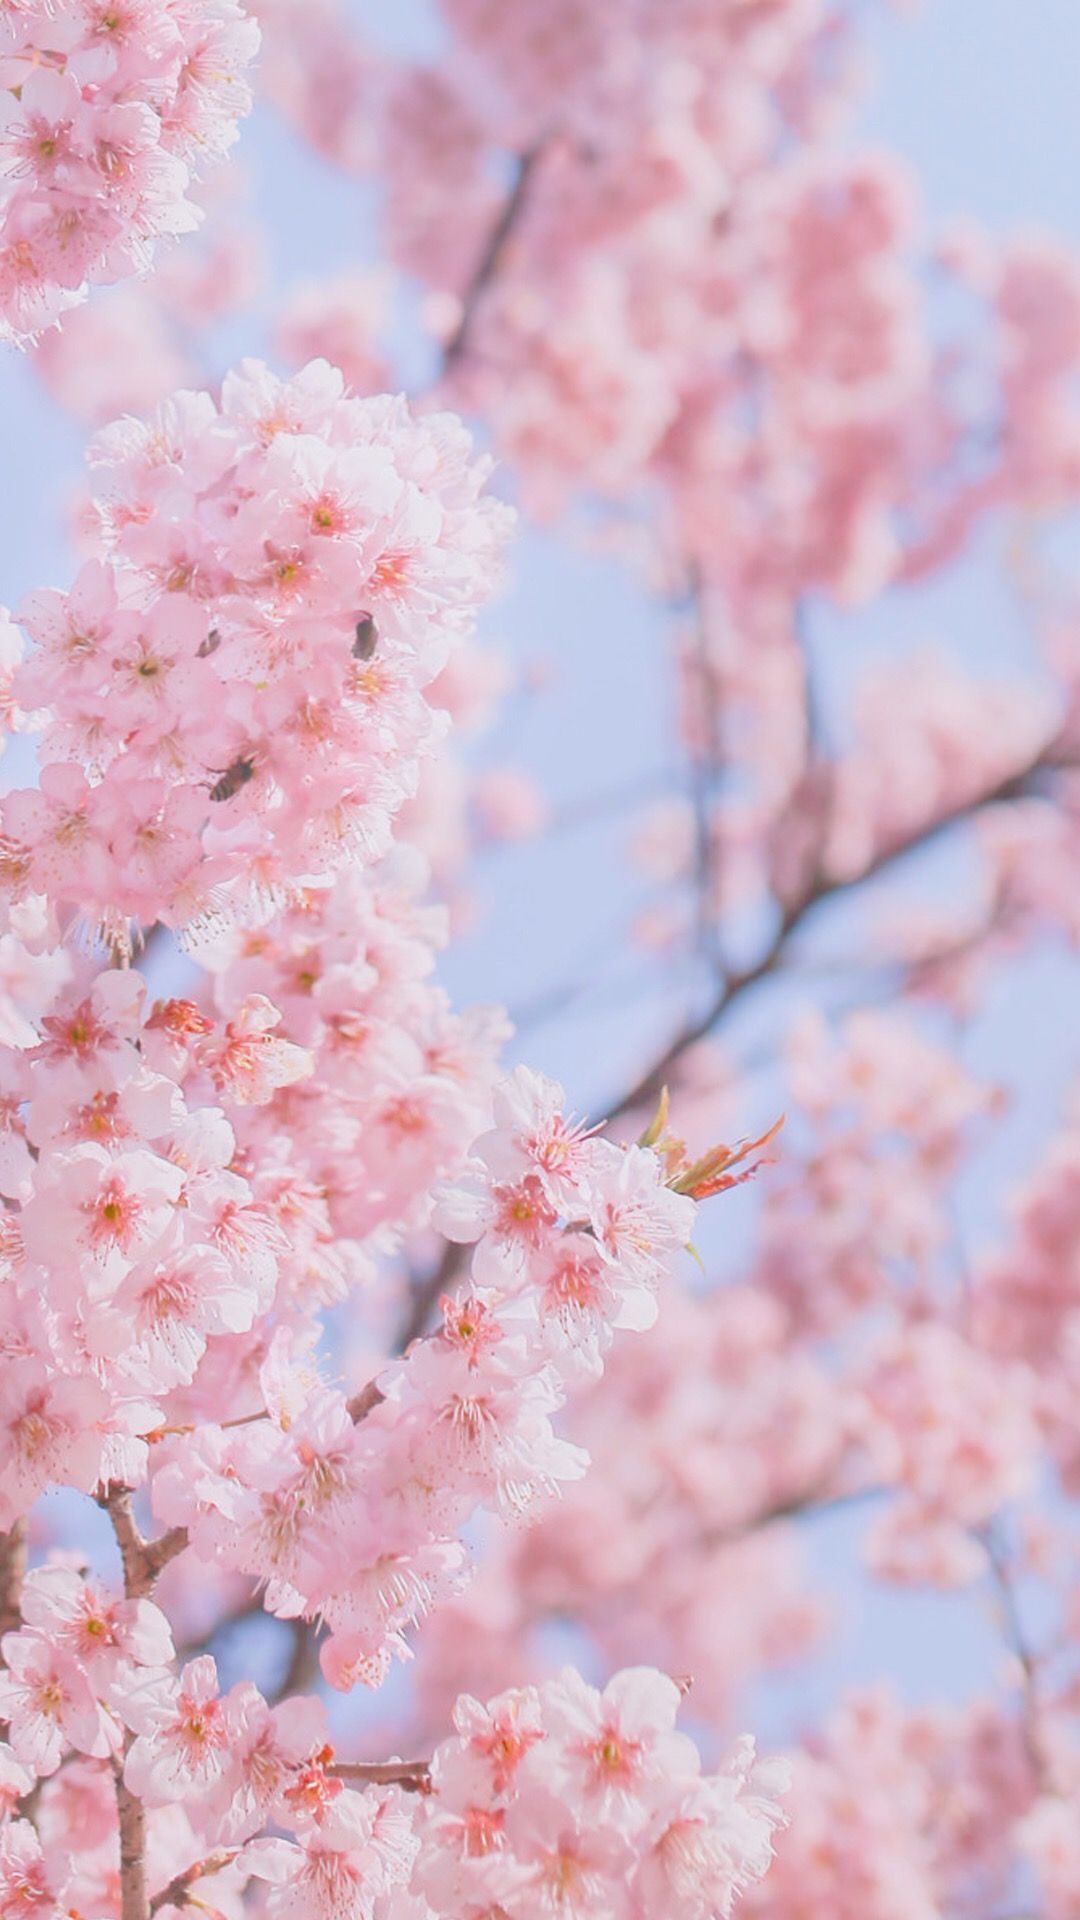 Aesthetic Cherry Blossom Wallpapers - Wallpaper Cave